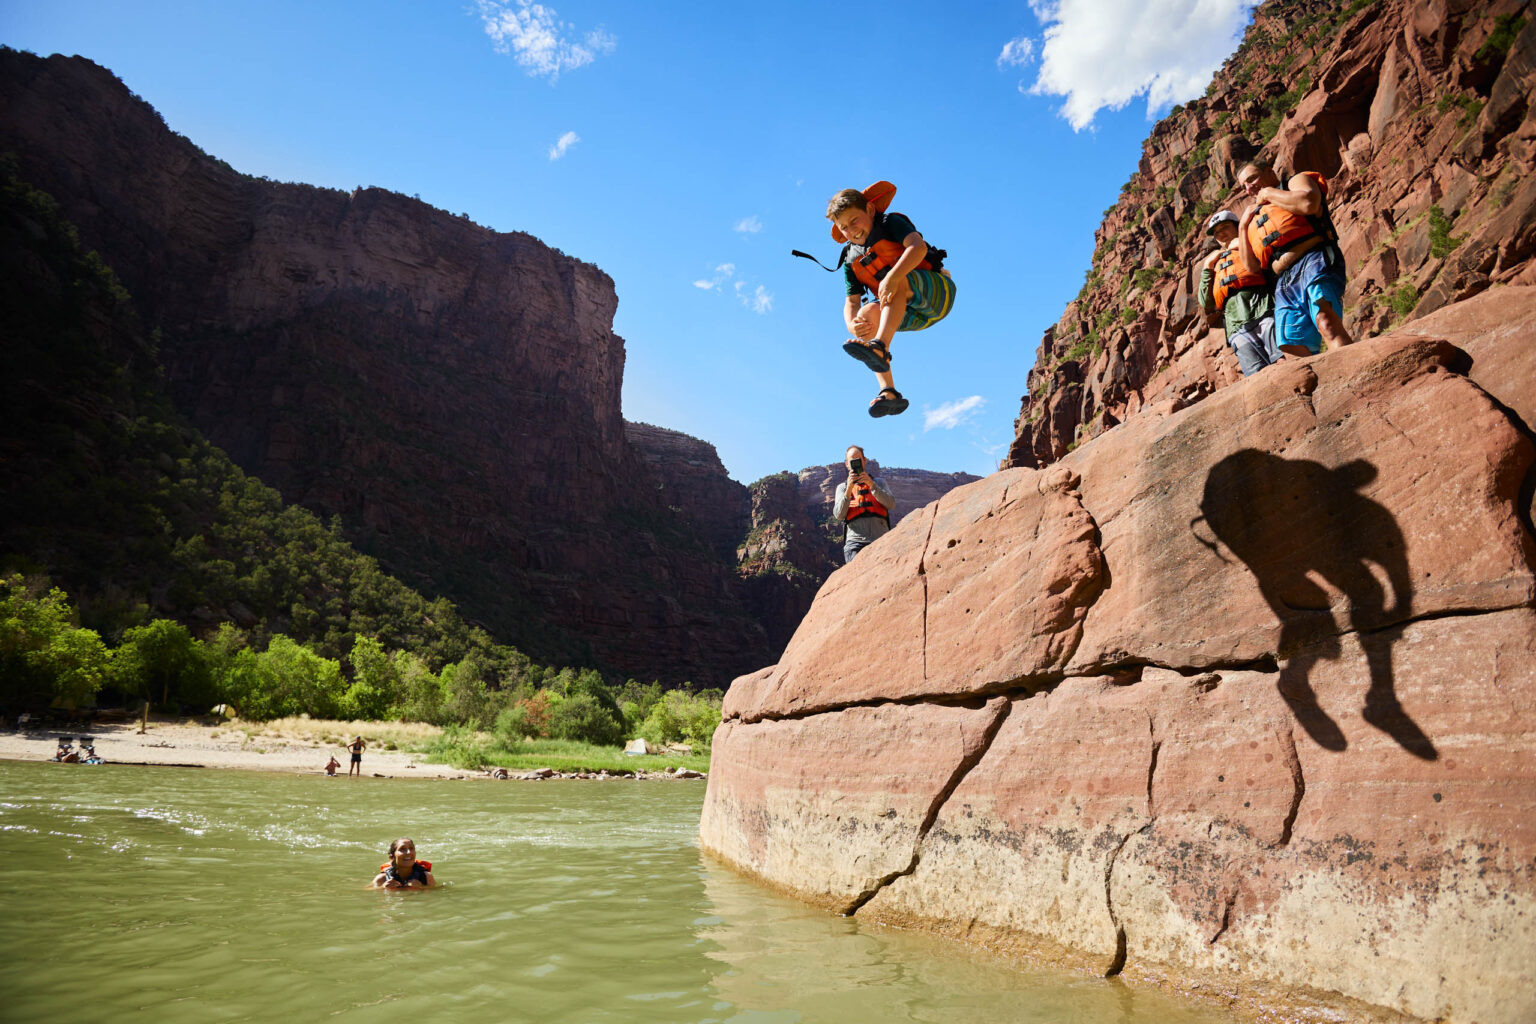 Kid jumping into a river from a rock.